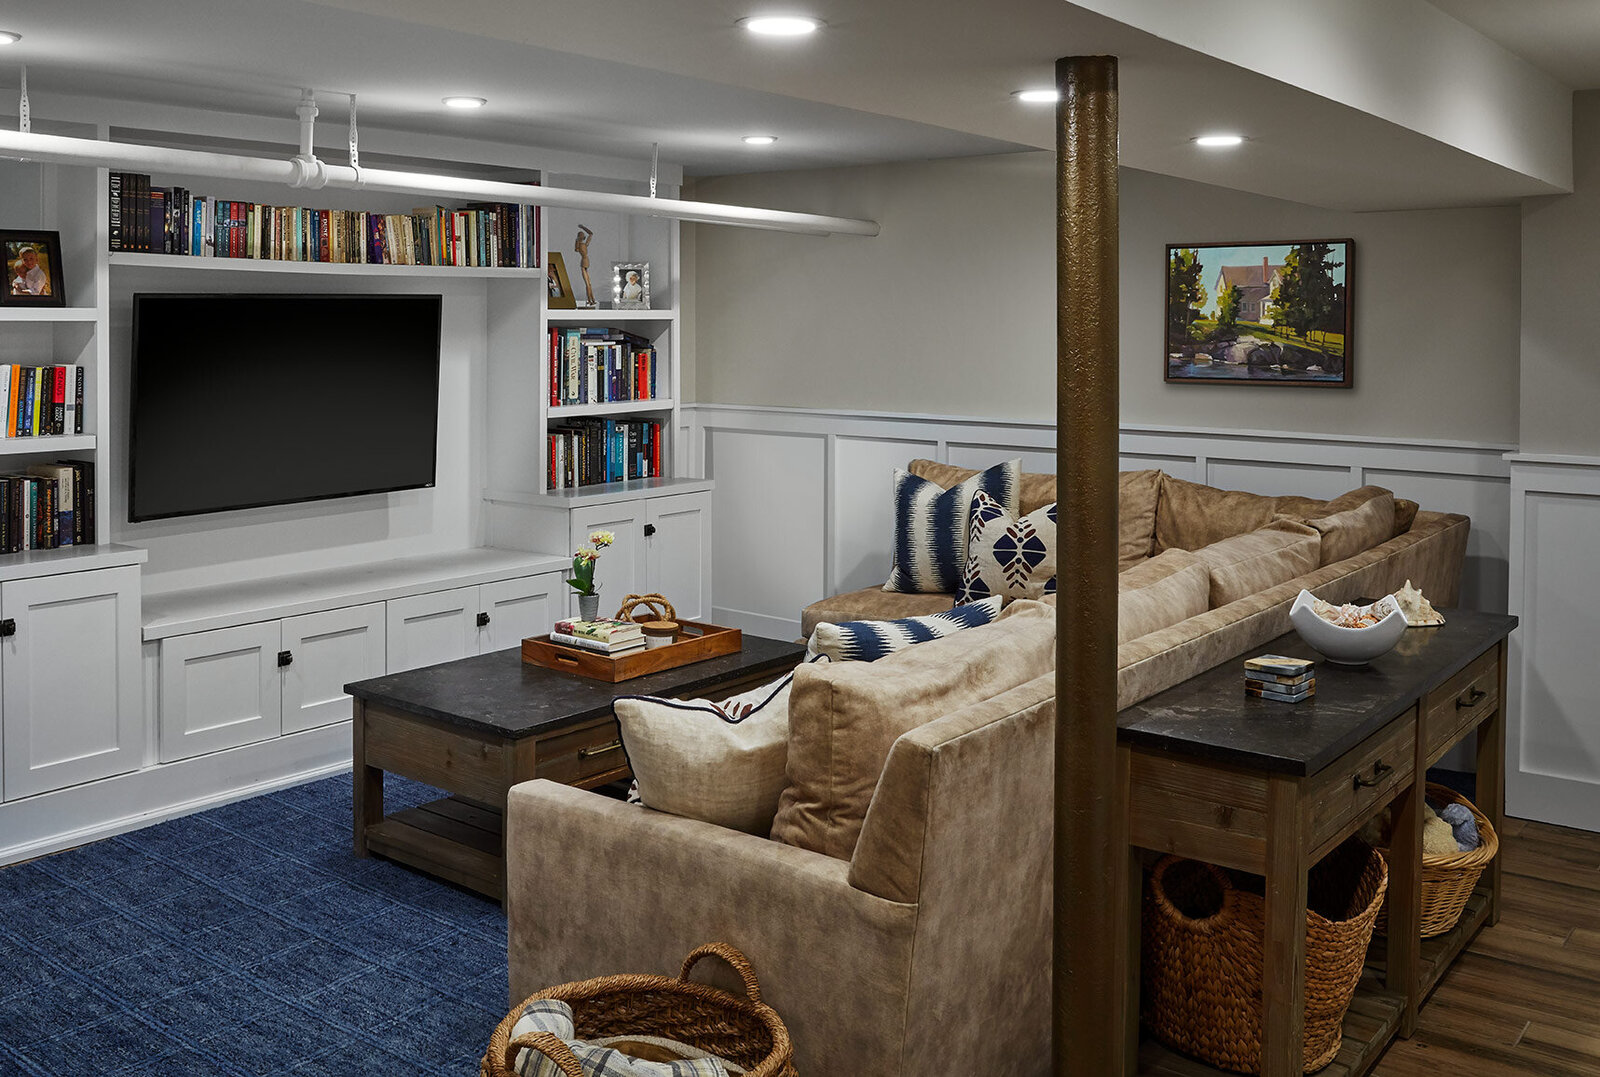 Basement home movie theater with built in shelves